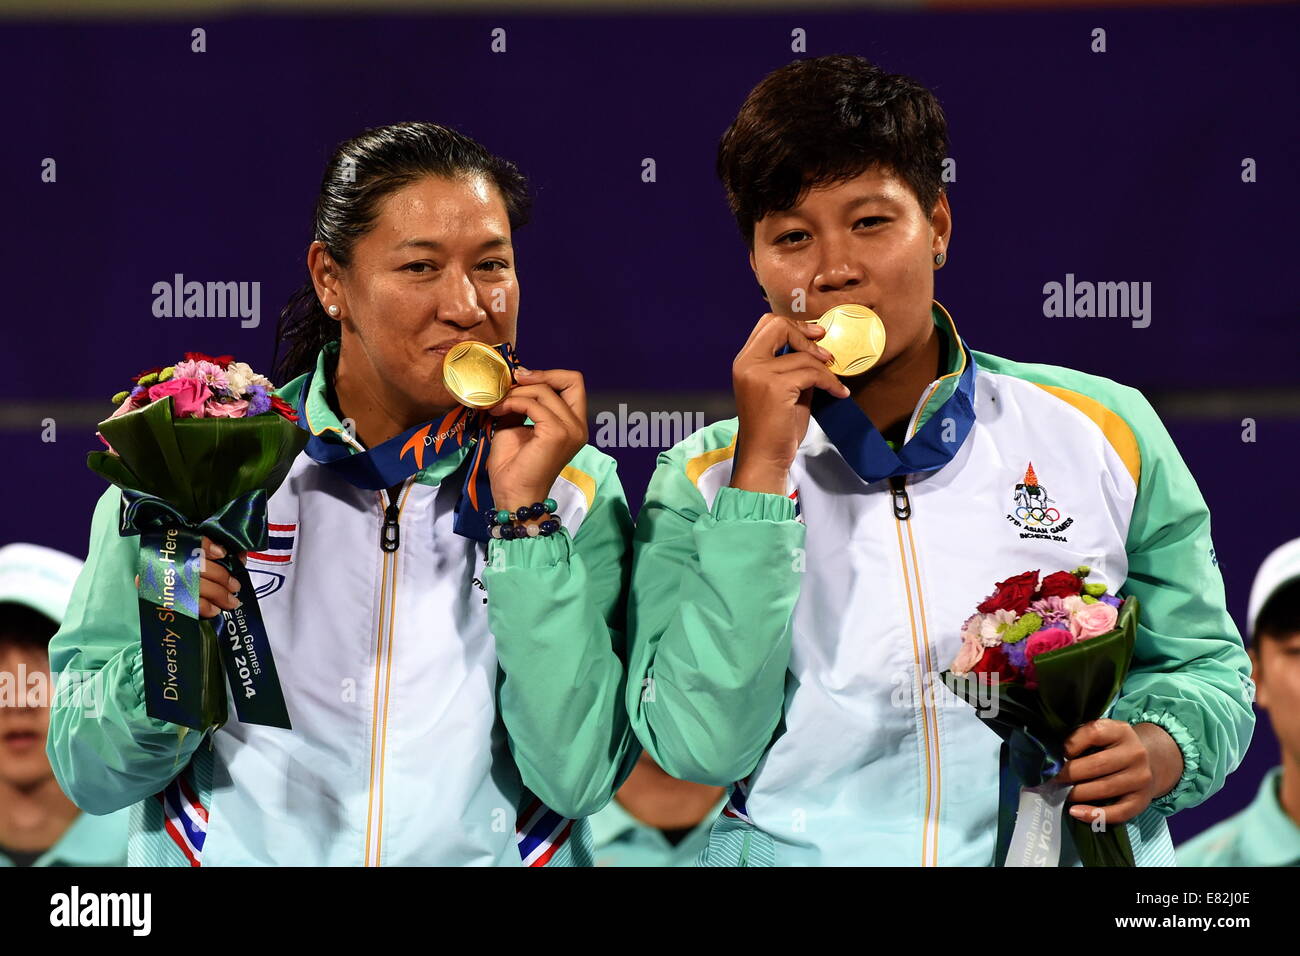 Incheon, South Korea. 29th Sep, 2014. Gold medalists Kumkhum Luksika (R) and Tanasugarn Tamarine of Tailand pose during the awarding ceremony of the women's doubles match of tennis at the 17th Asian Games in Incheon, South Korea, Sept. 29, 2014. Thailand defeated Chinese Taipei 2-1 and claimed the title. © Gao Jianjun/Xinhua/Alamy Live News Stock Photo